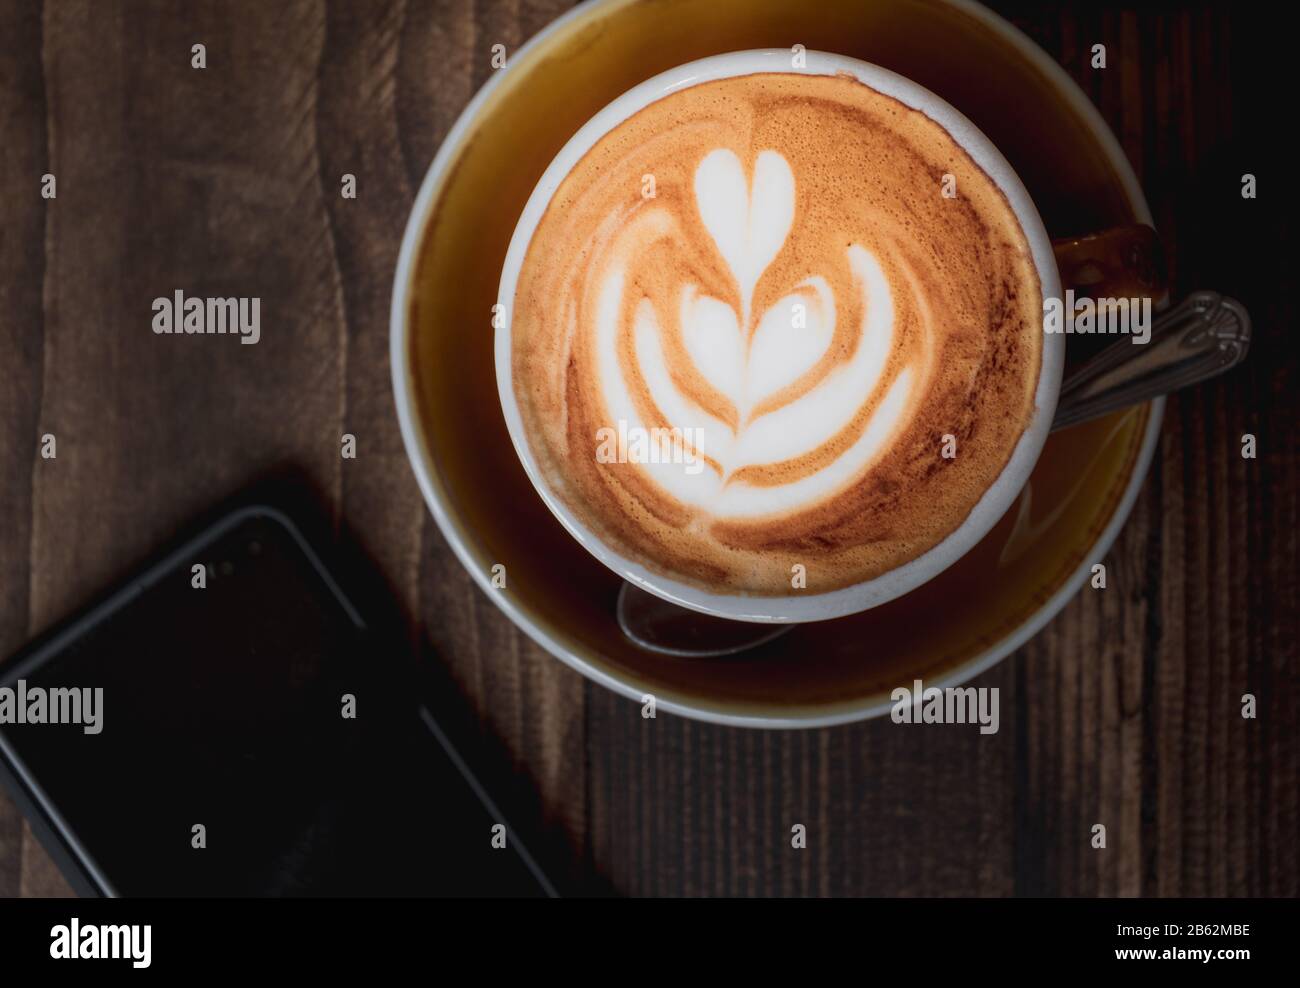 Top down image of a Latte and mobile phone showing the coffee culture or weekend lifestyle of millennials Stock Photo